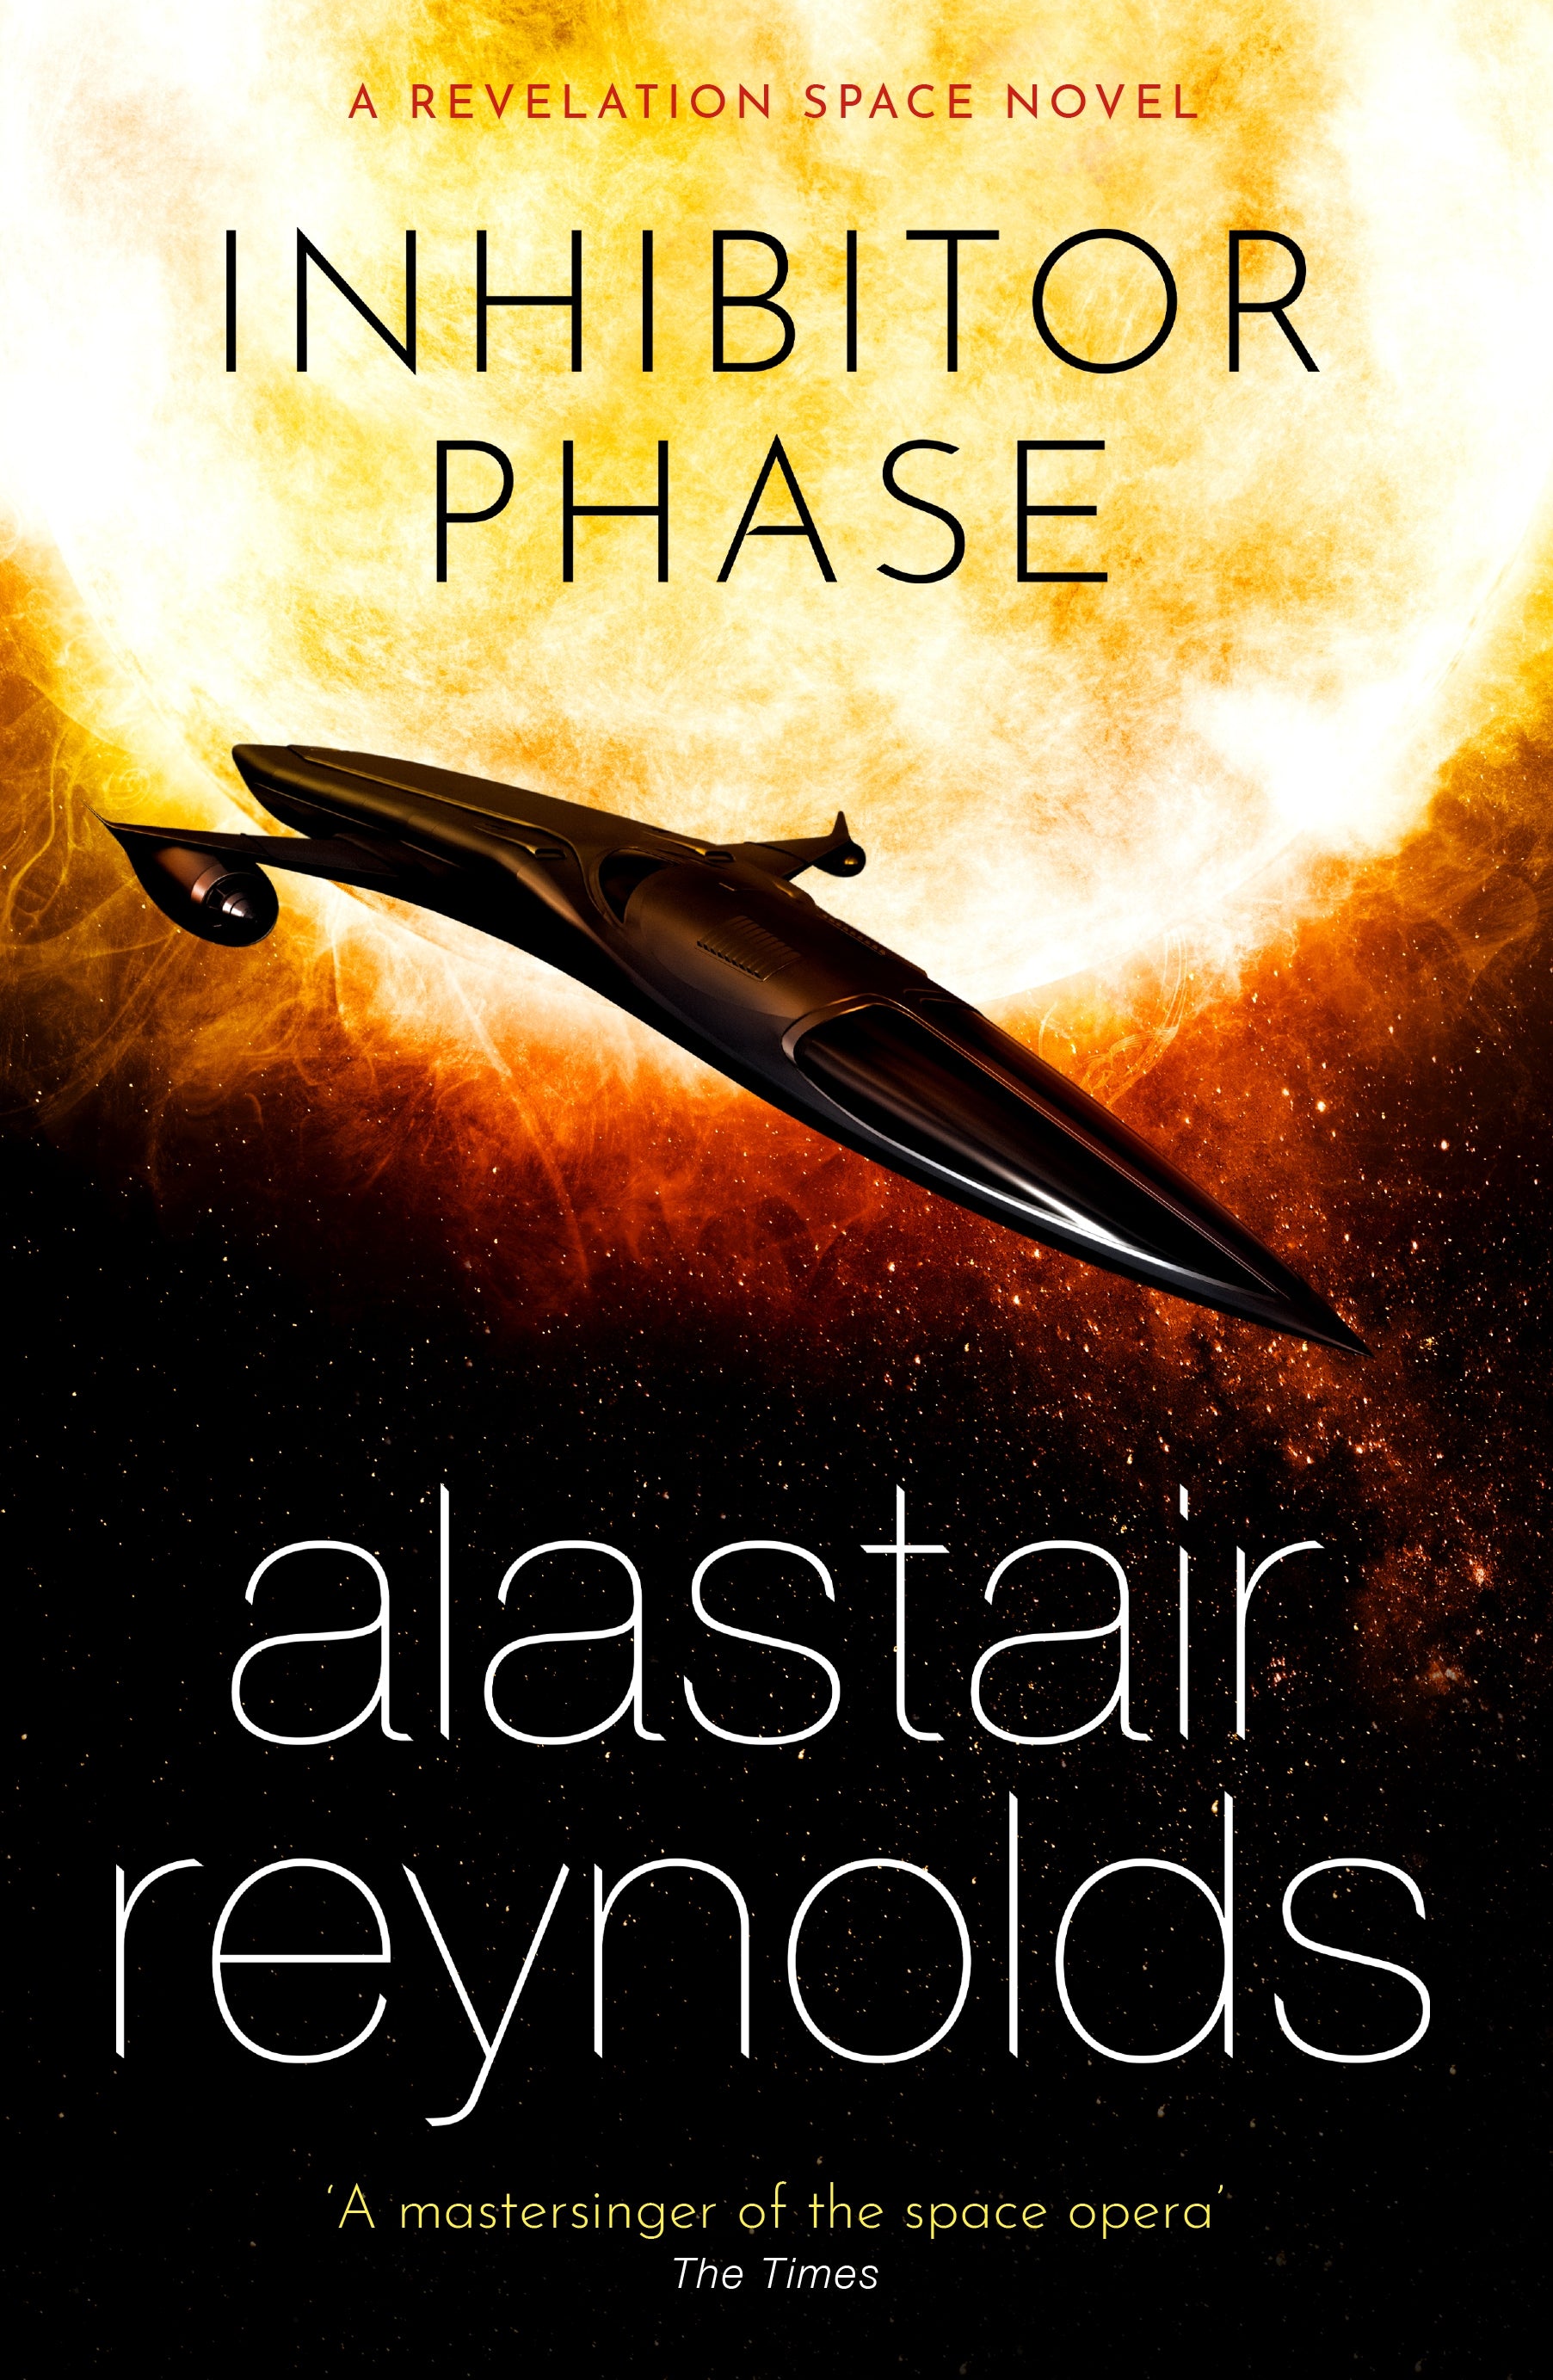 Inhibitor Phase by Alastair Reynolds